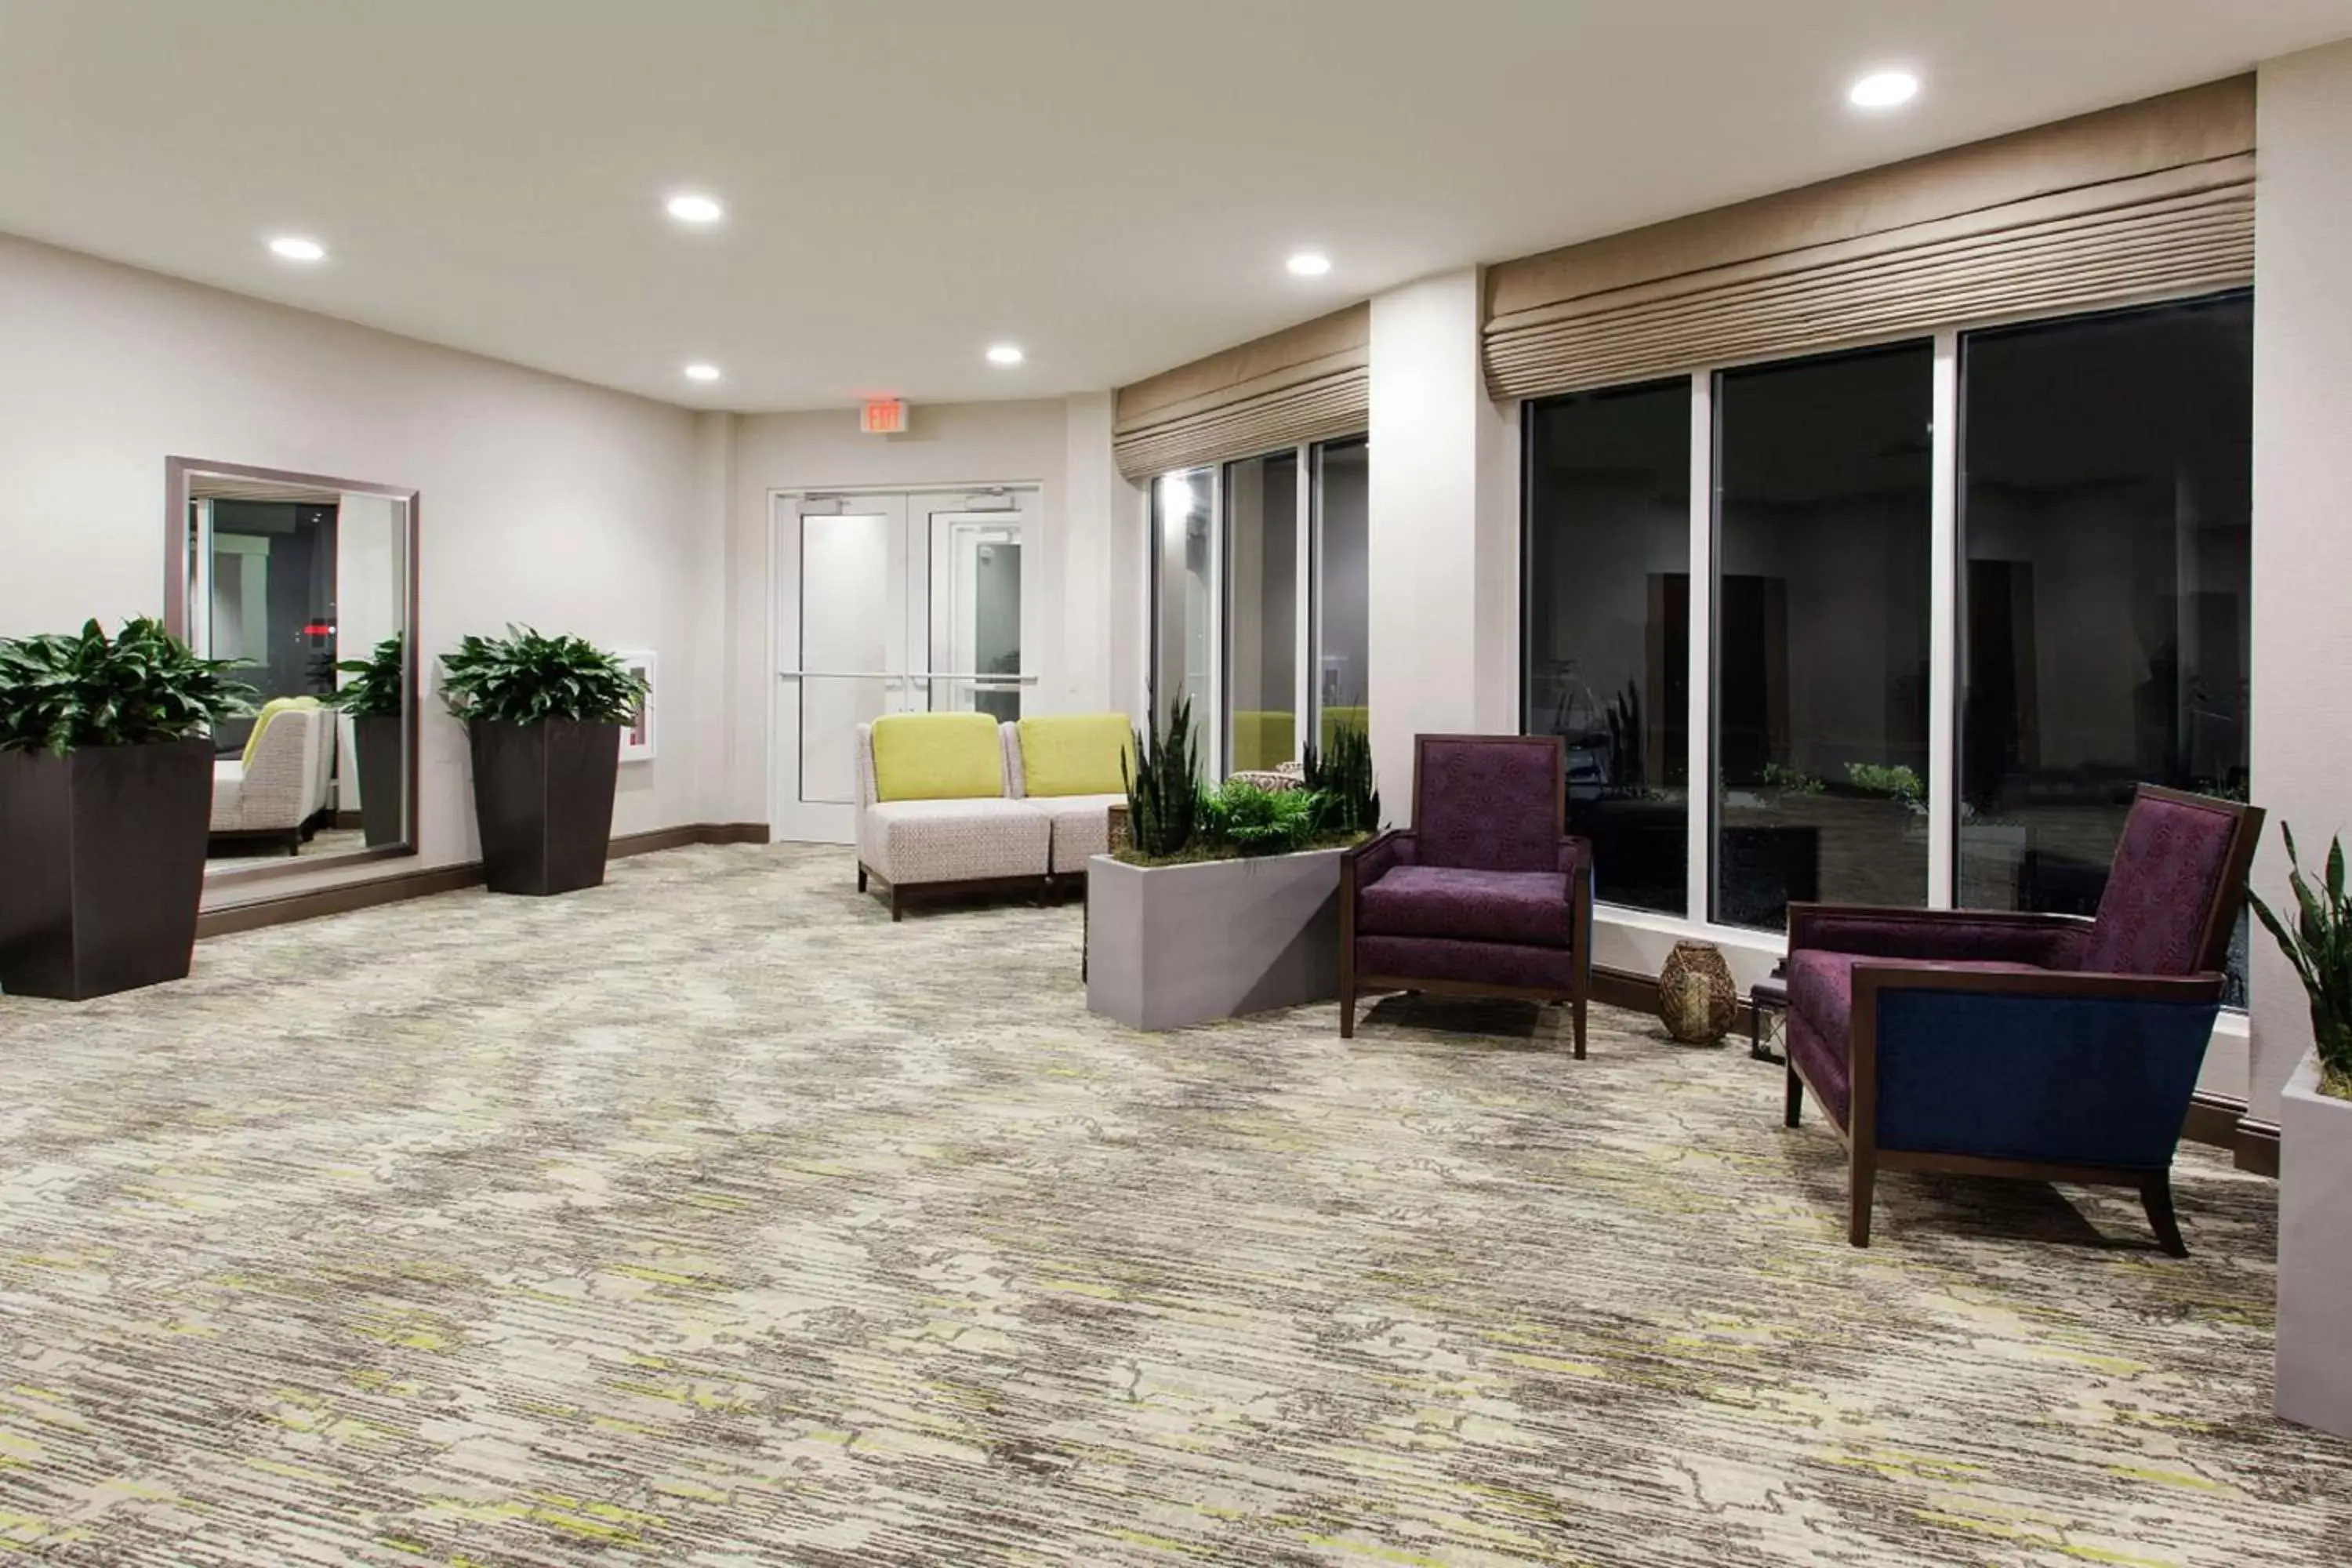 Meeting/conference room, Lobby/Reception in Hilton Garden Inn Montgomery - EastChase